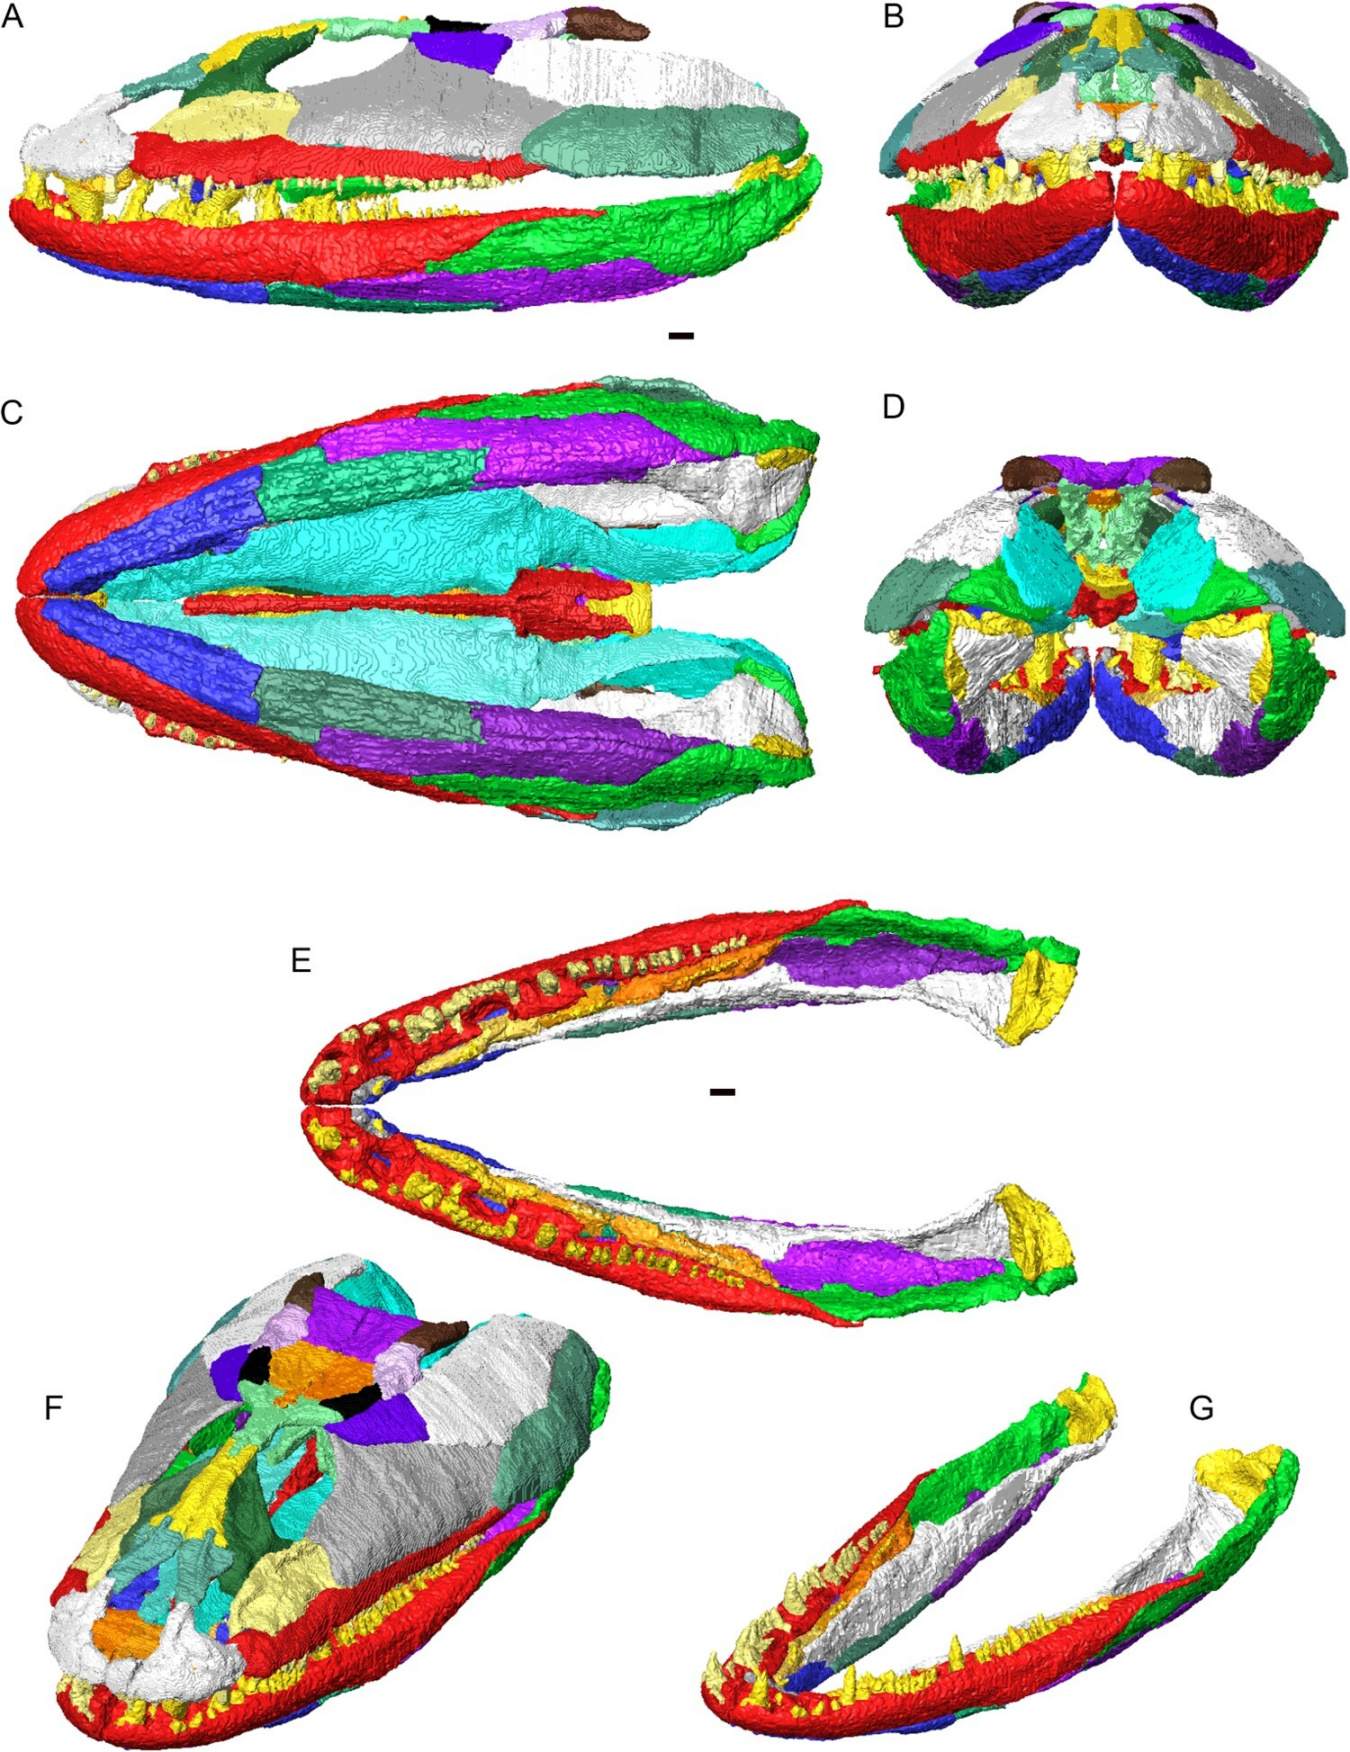 3D reconstruction of the cranium and lower jaws of Crassigyrinus scoticus in articulation. Individual bones shown in different colors. A, left lateral view; B, anterior view; C, ventral view; D, posterior view; E, articulated lower jaws (no cranium) in dorsal view; F, cranium and lower jaw in dorsolateral oblique view; G, articulated lower jaws in dorsolateral oblique view.